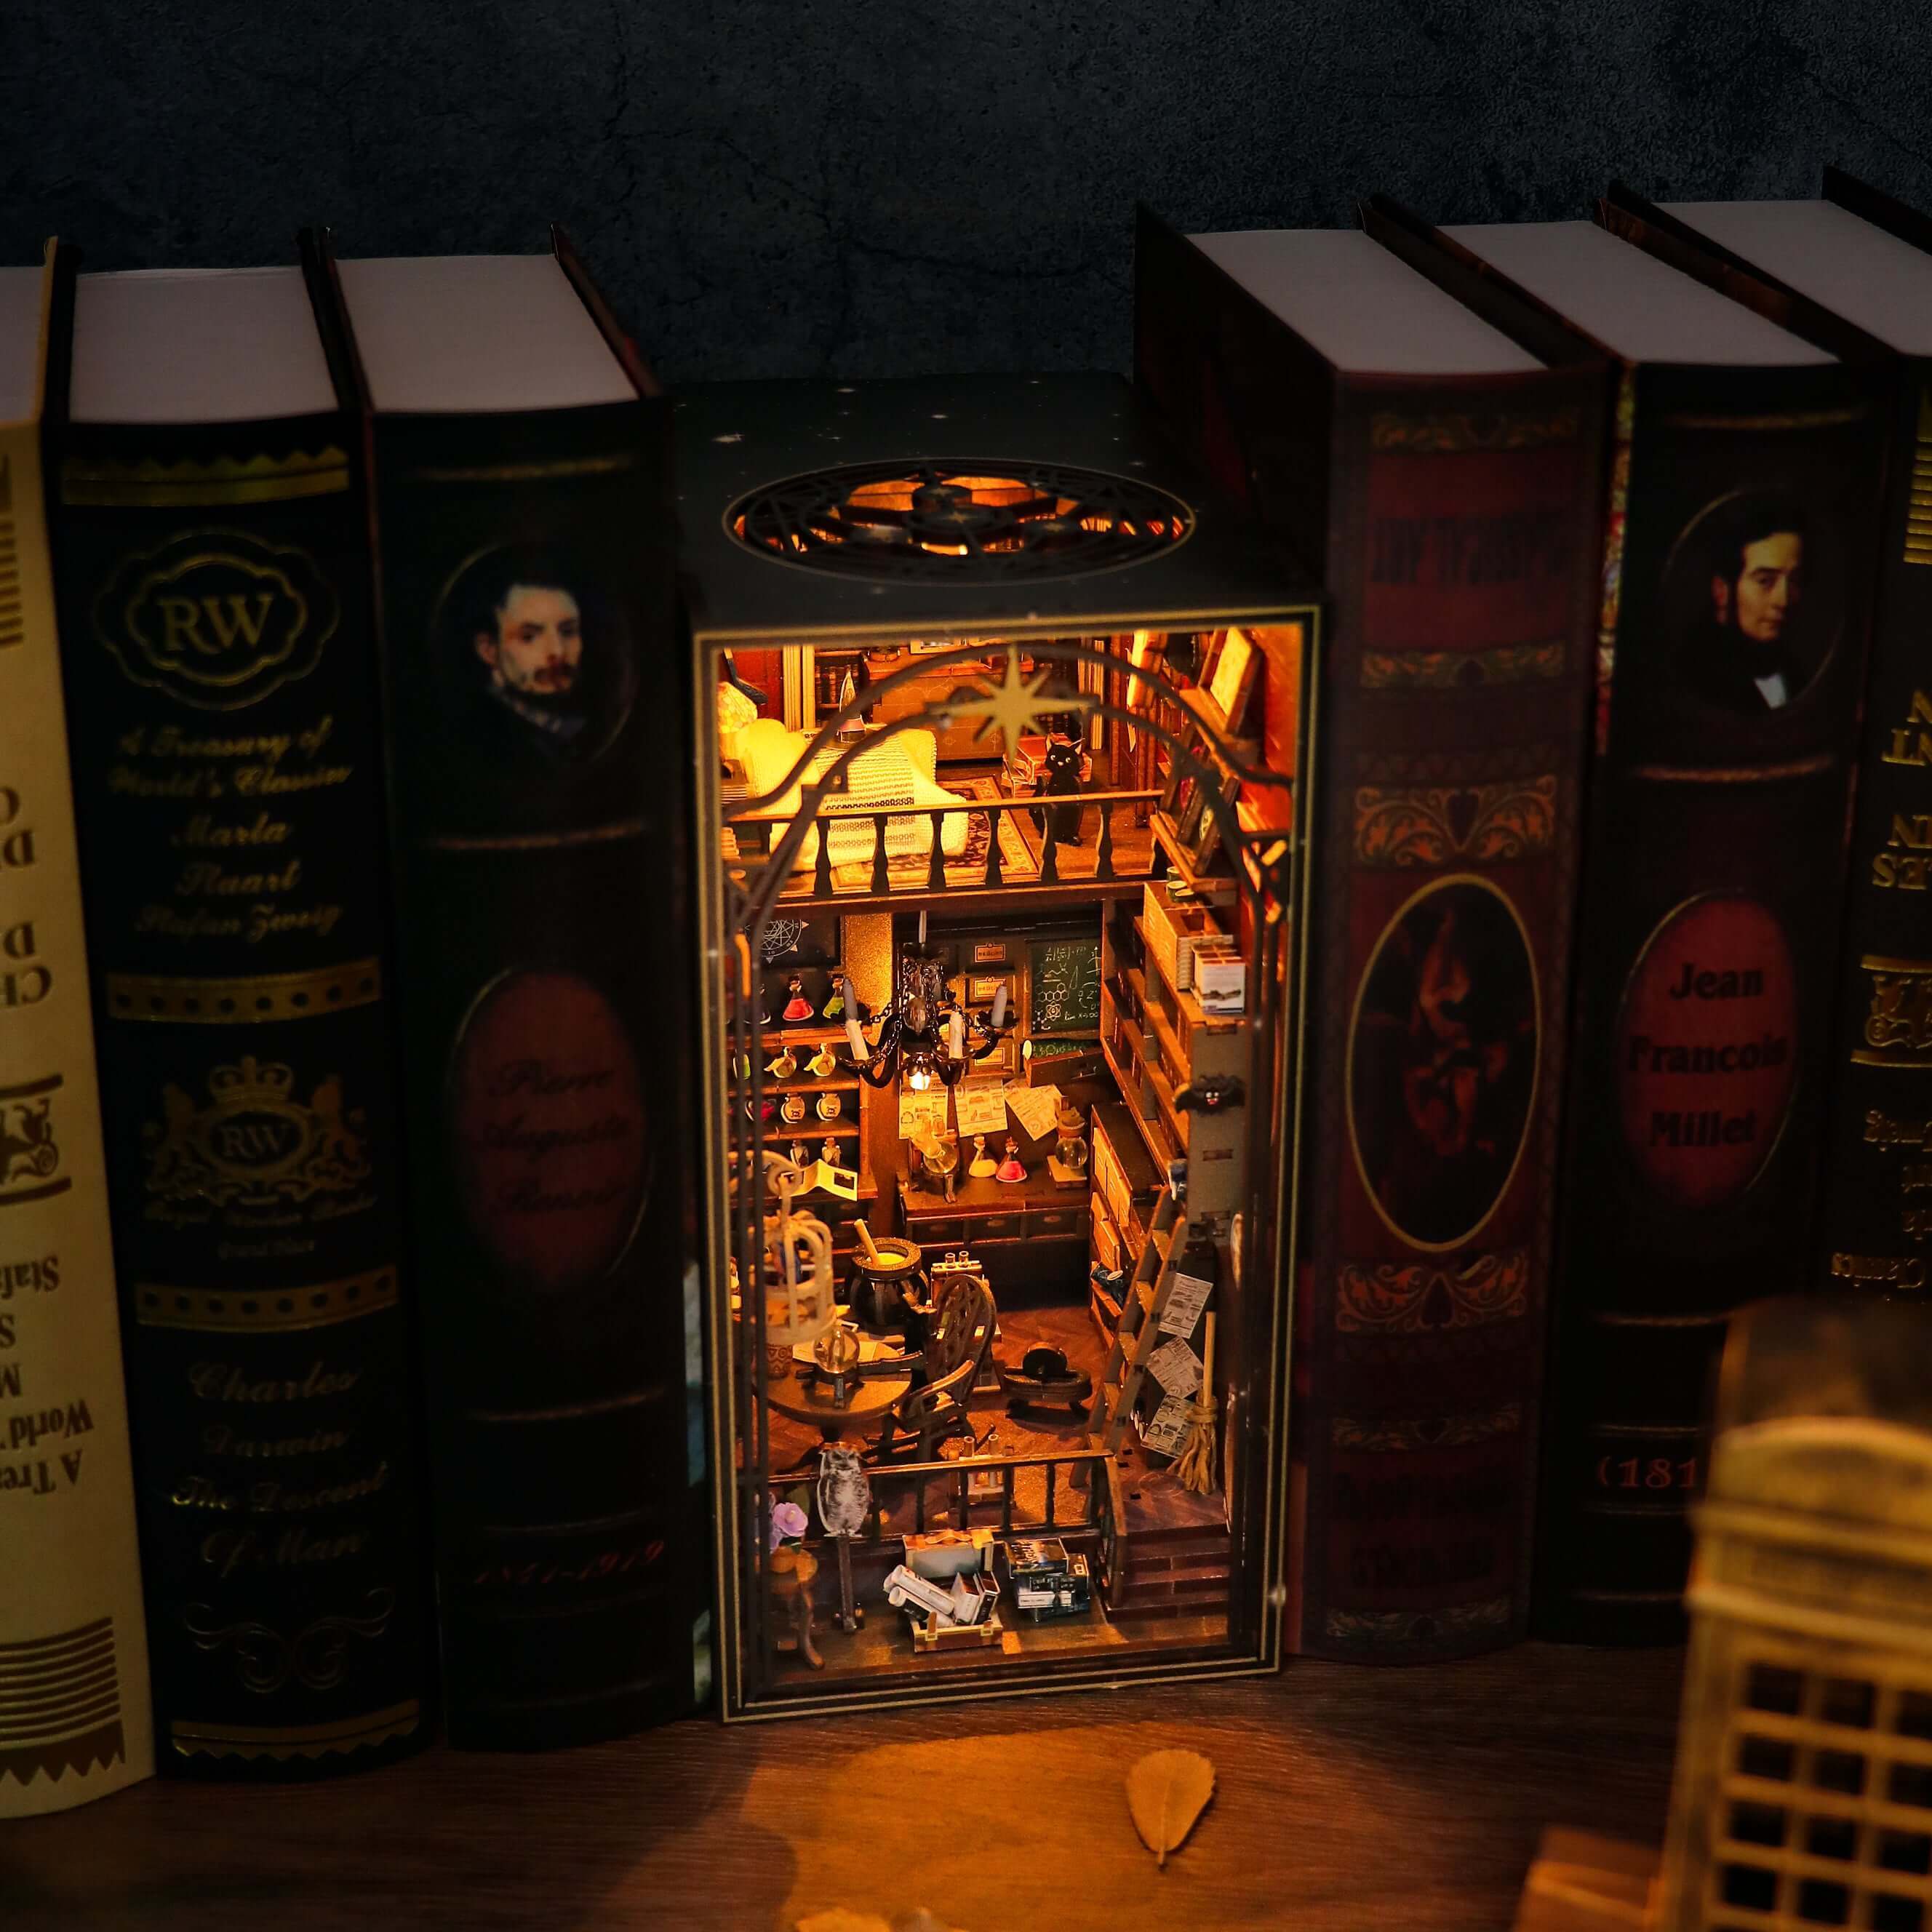 Best Themed Book Nooks for Your Bookshelf – ByAnavrin